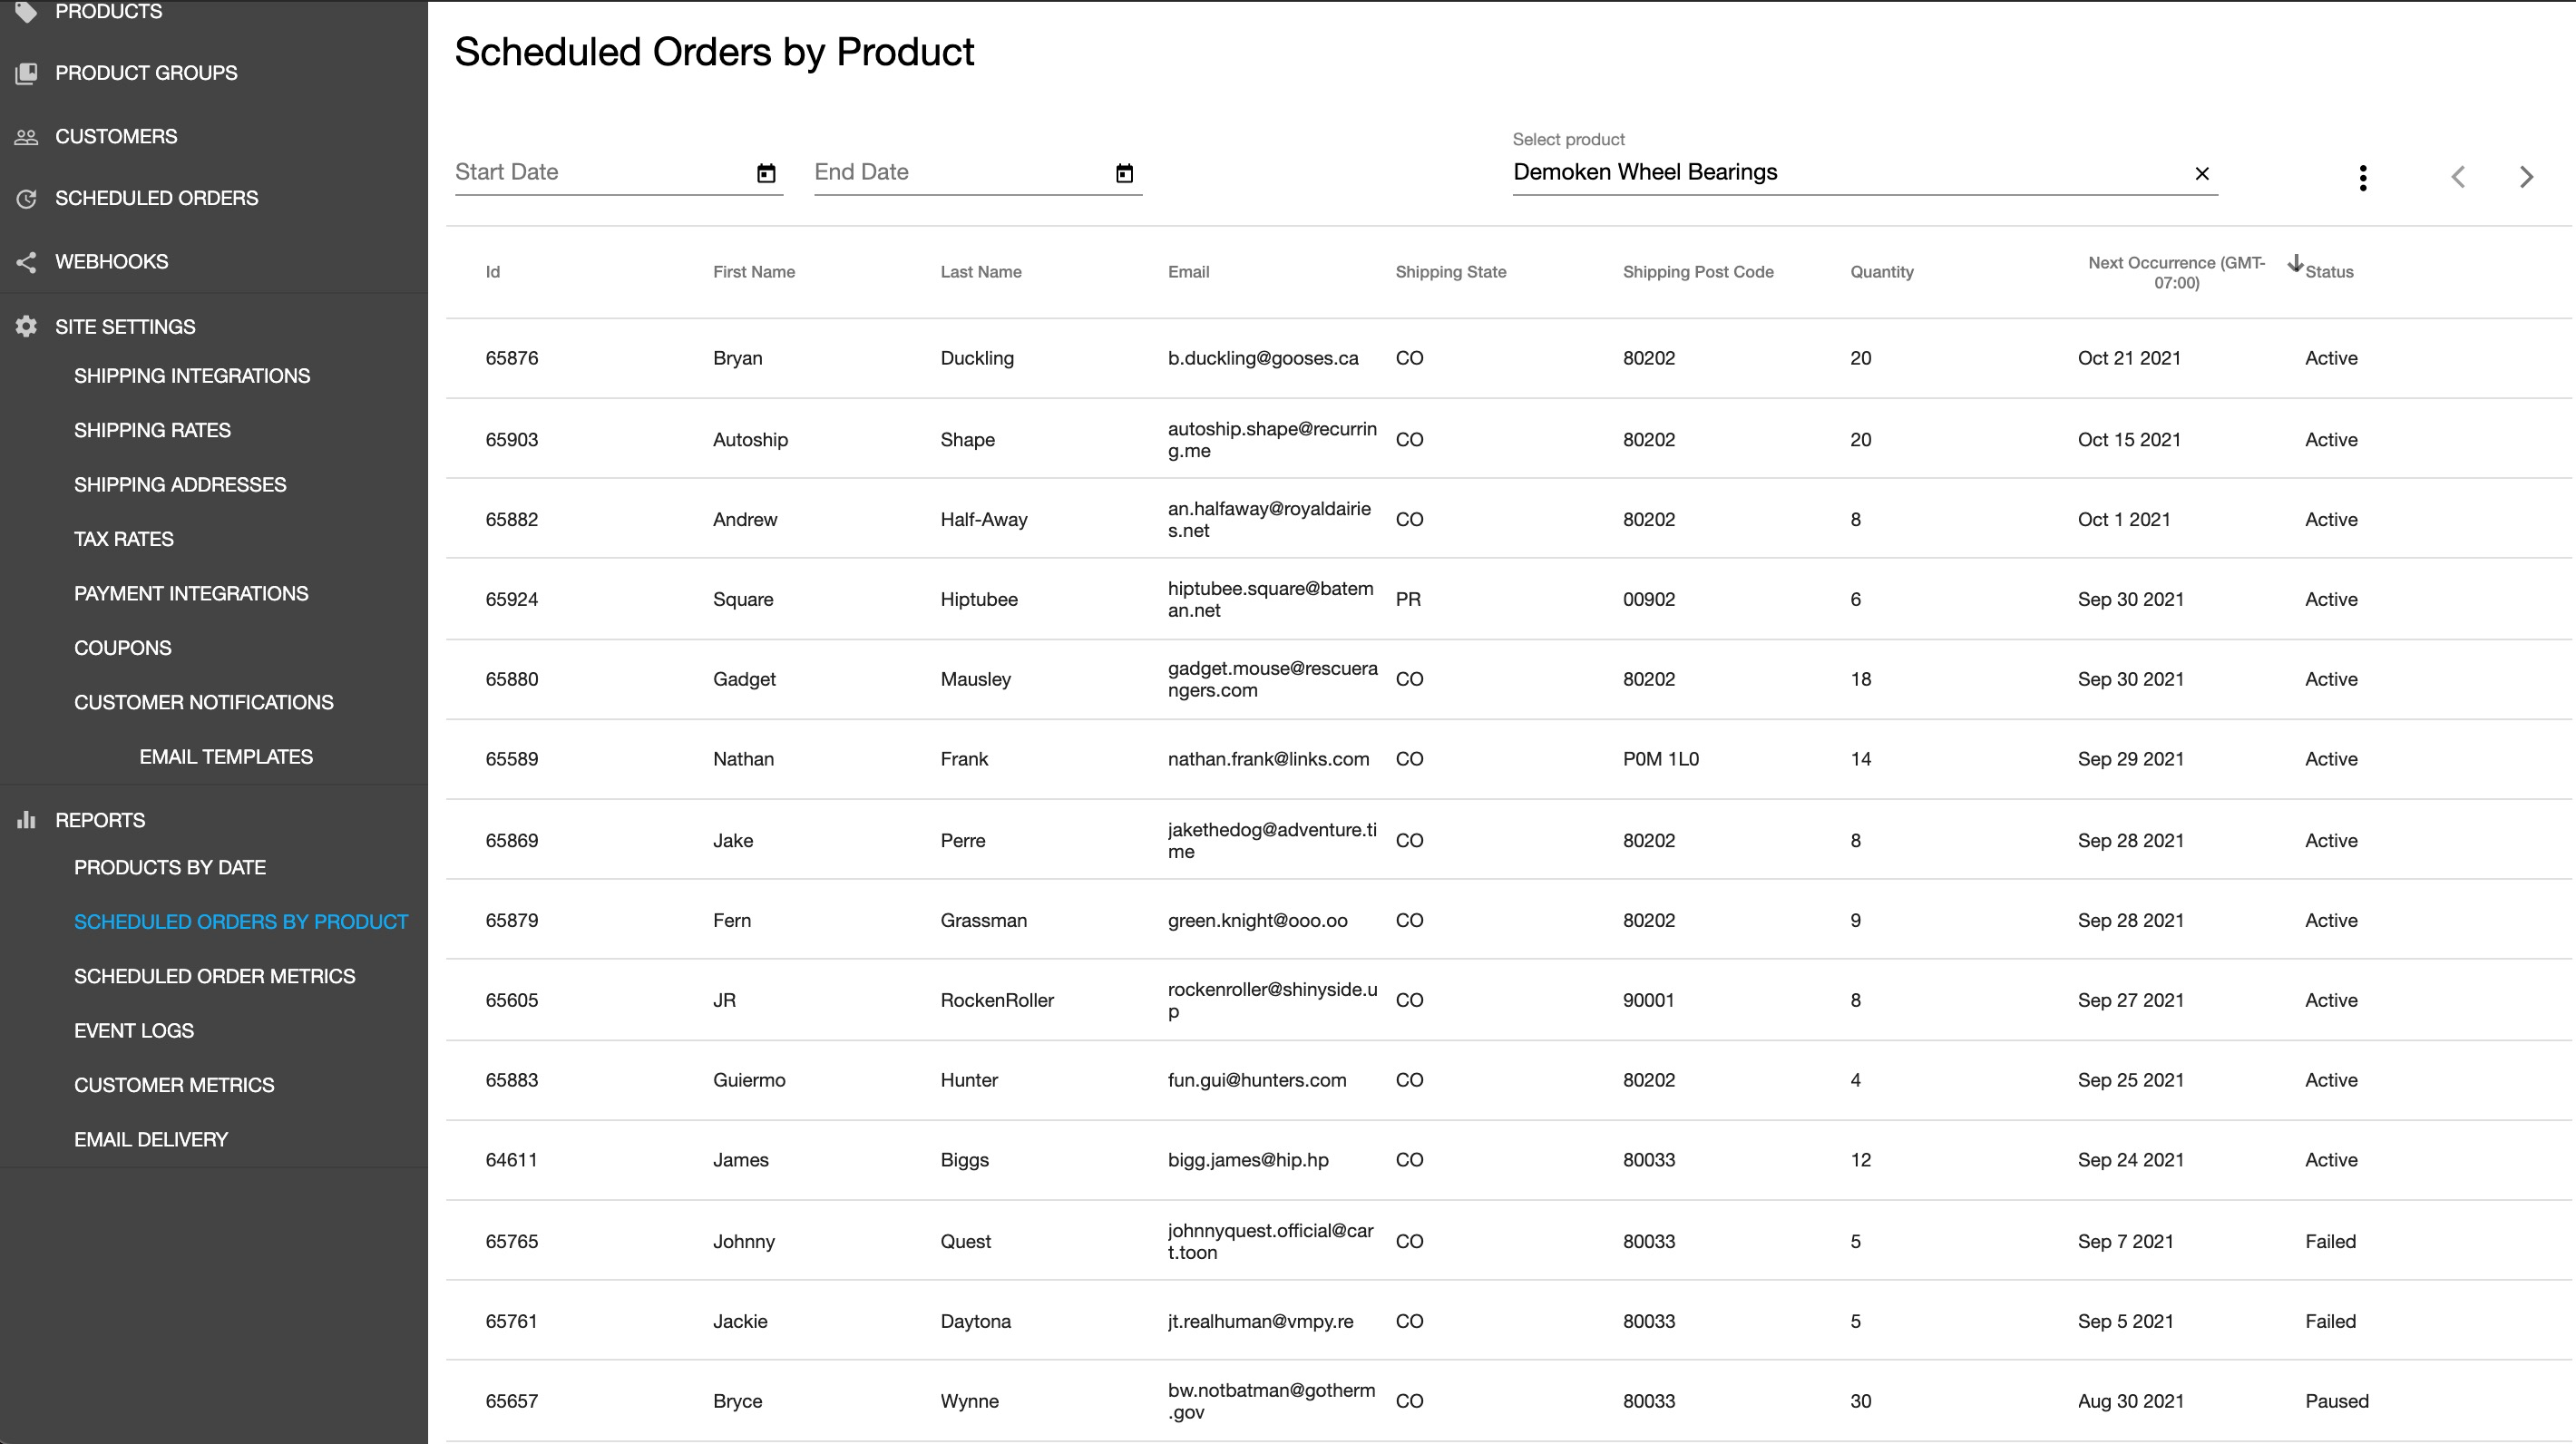 Scheduled Orders by Product Report